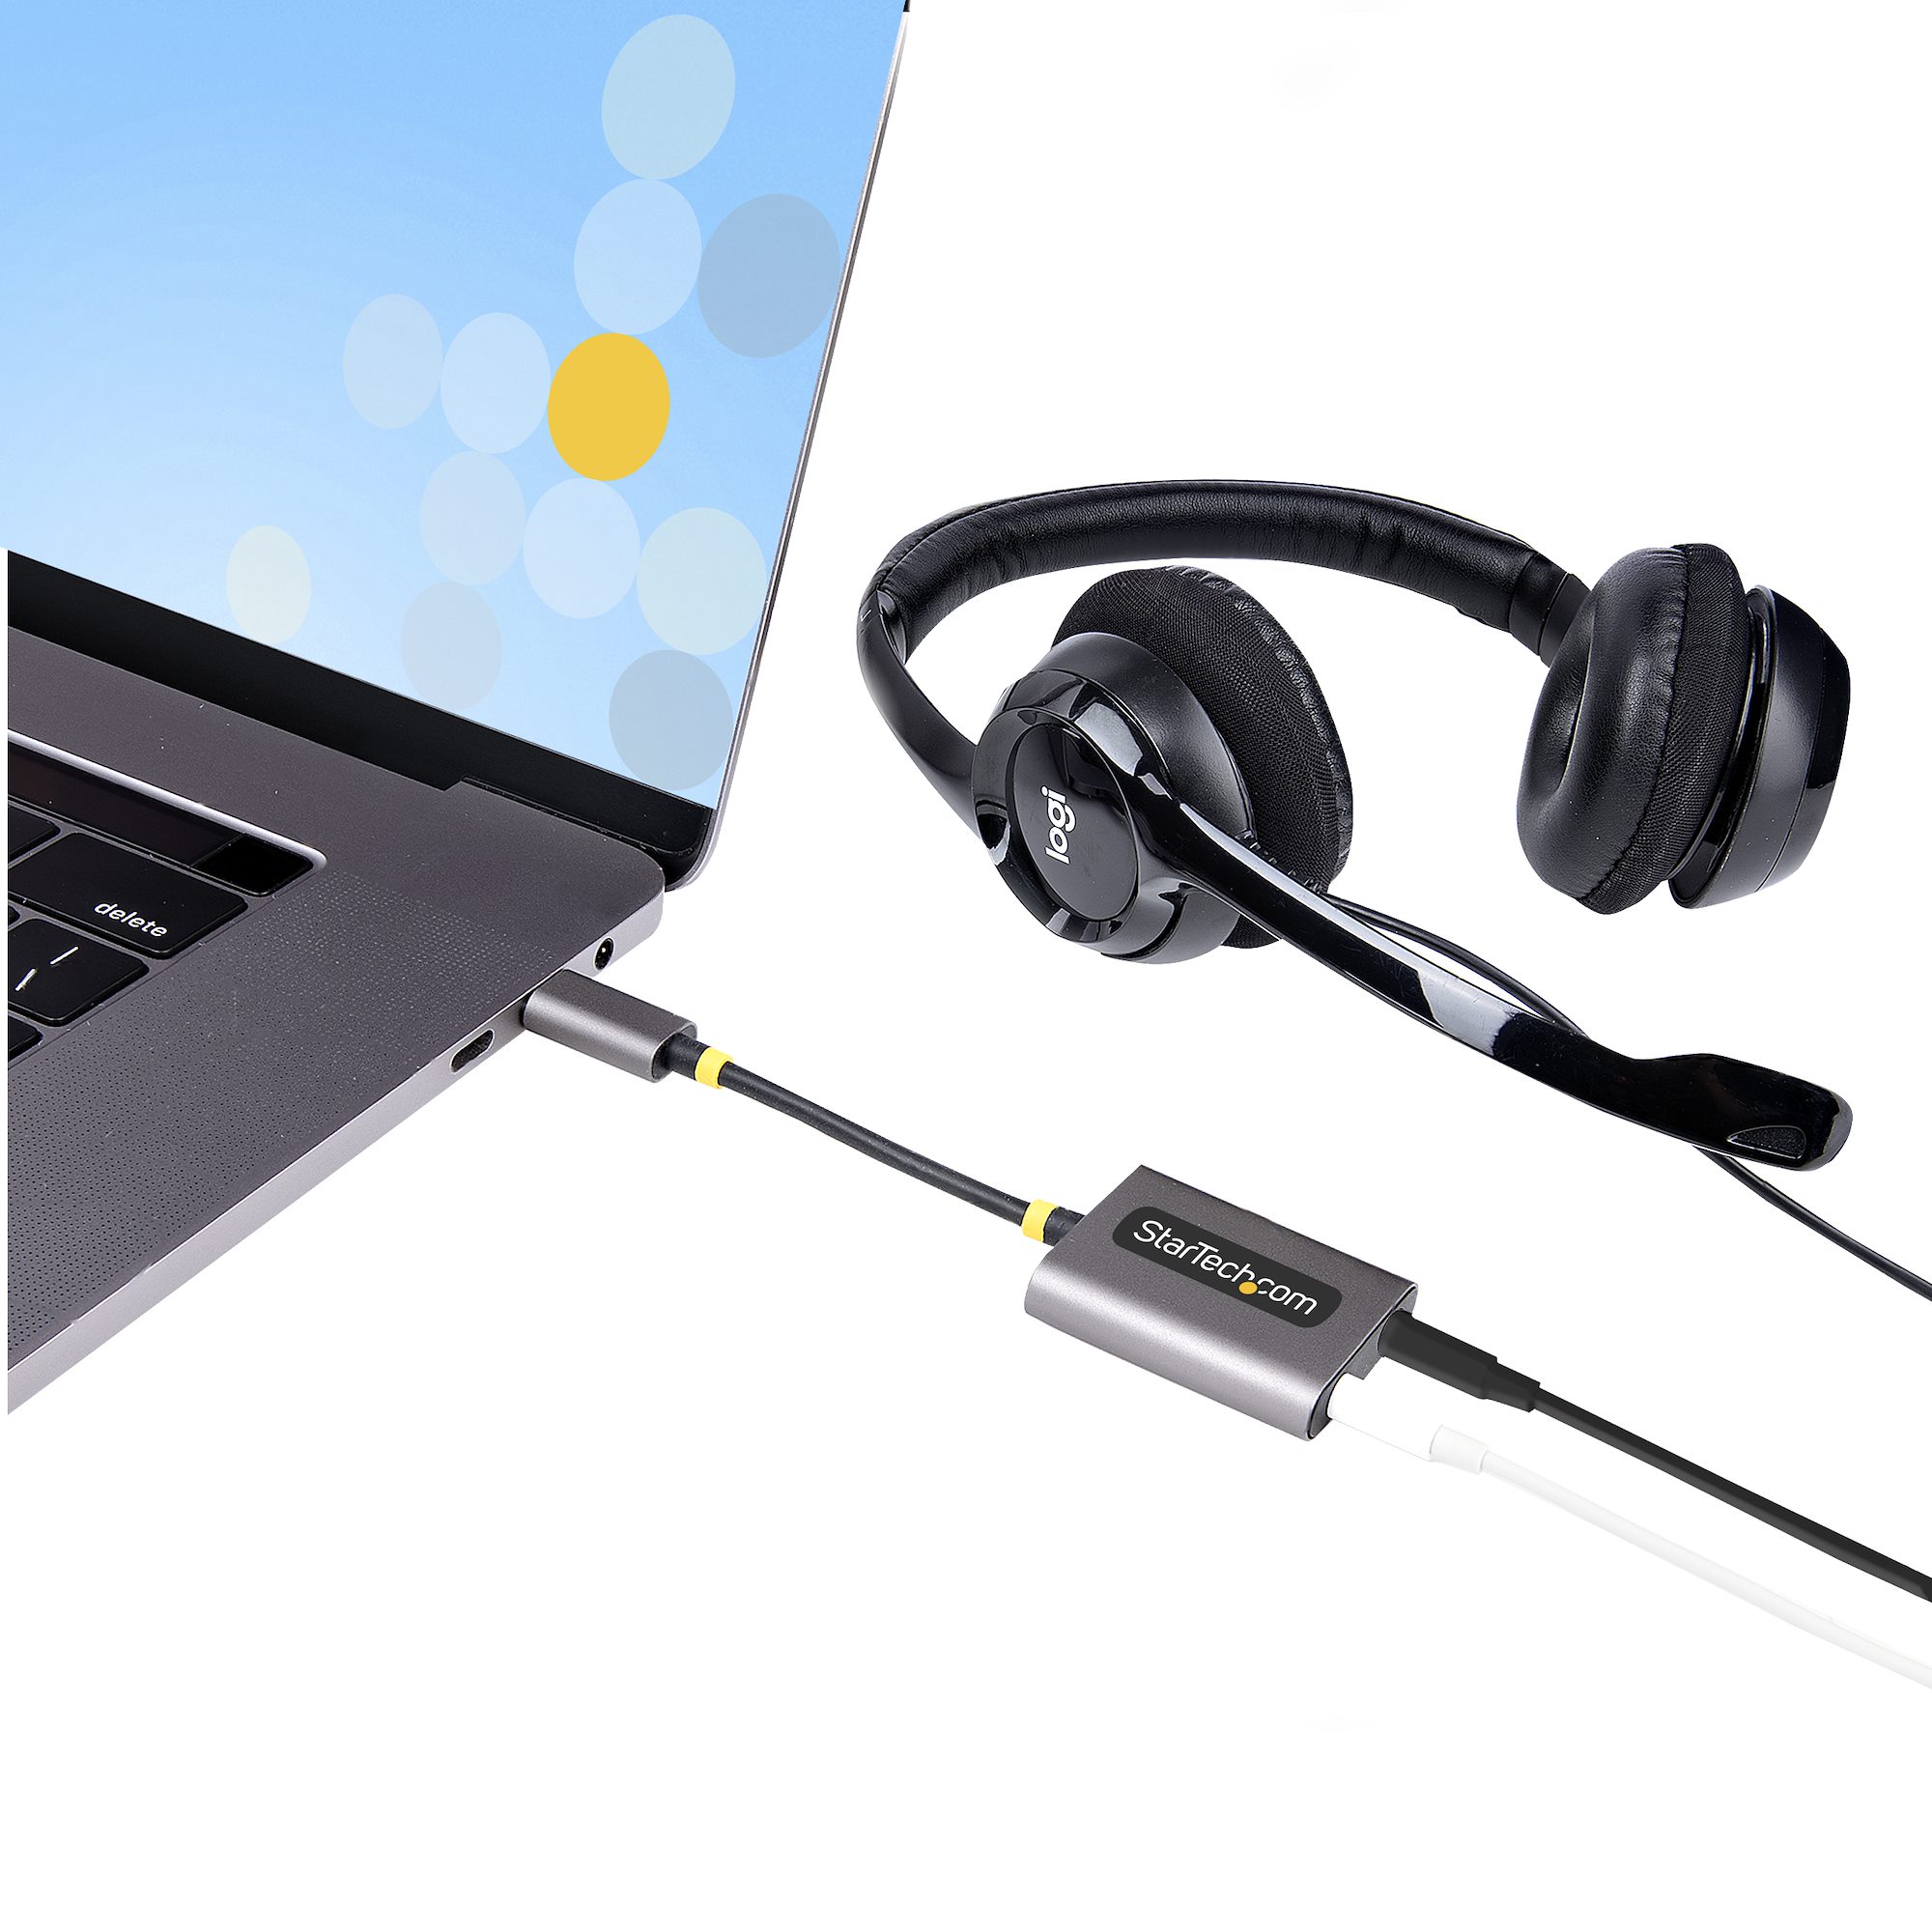 StarTech.com USB C Audio & Charge Adapter - USB-C Audio Adapter w/ 3.5mm  TRRS Headphone/Headset Jack and 60W USB Type-C Power Delivery Pass-through